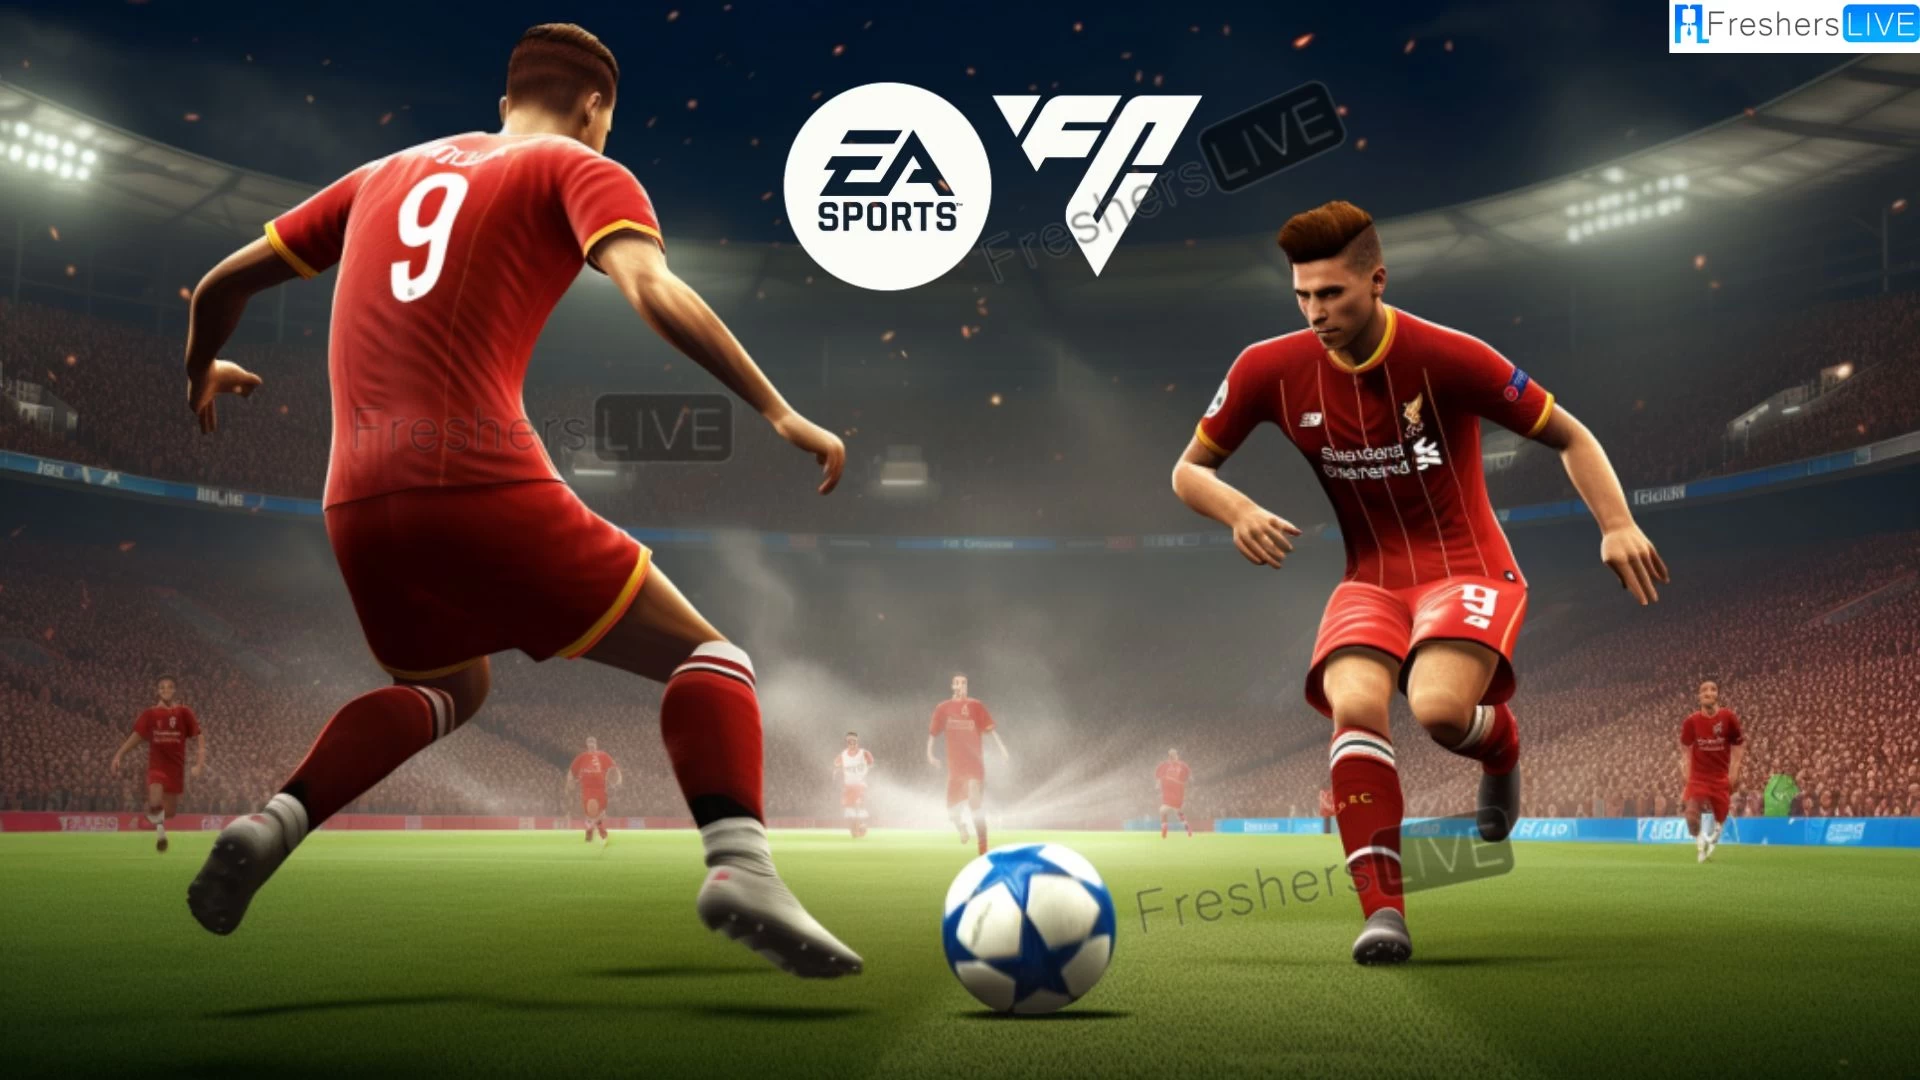 How To Login Ea Sports FC 24 Web App? How to use the FC 24 Web App and How to Access?